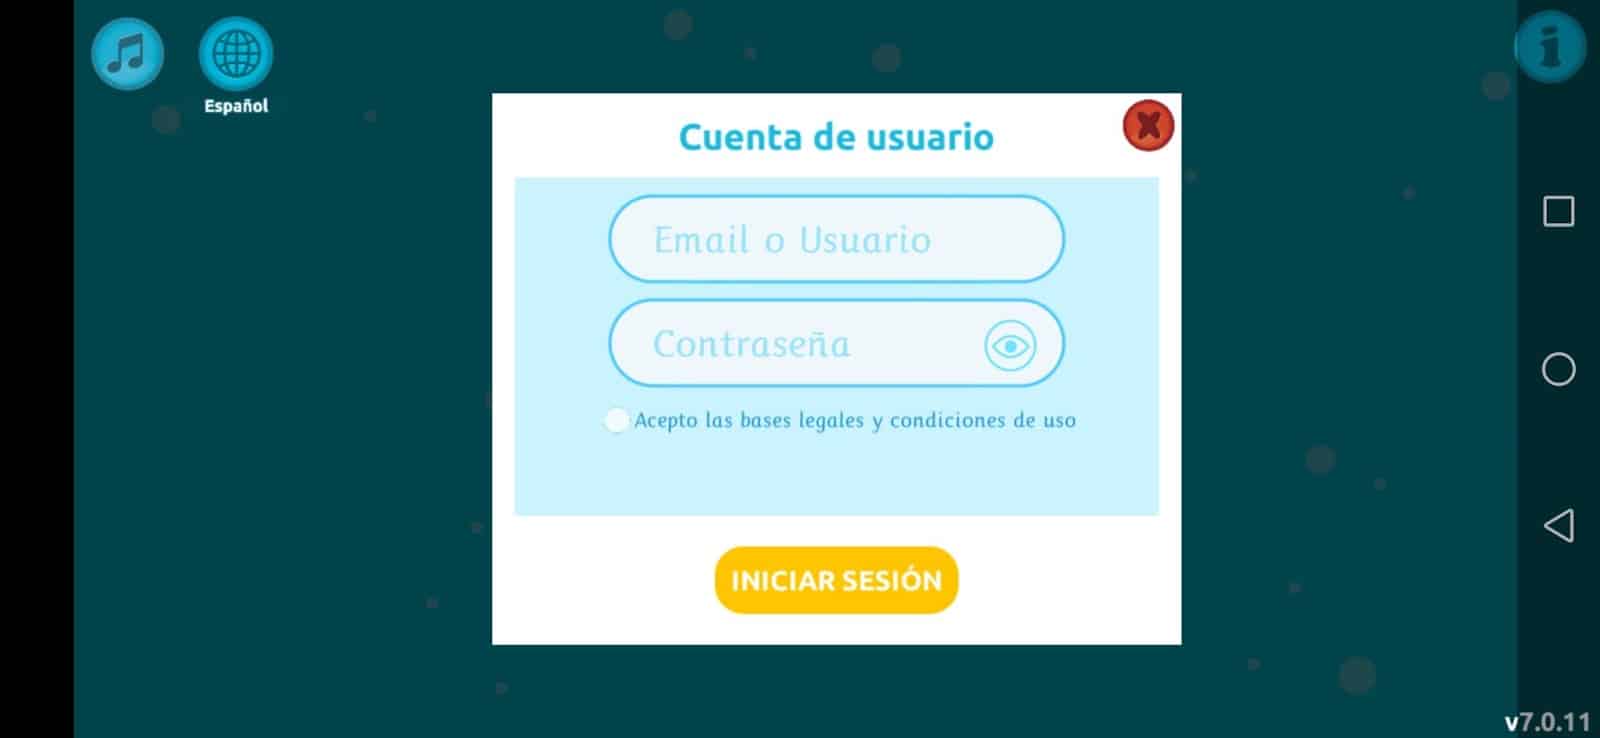 How to delete Catalan course? (Info in comments) : r/duolingo